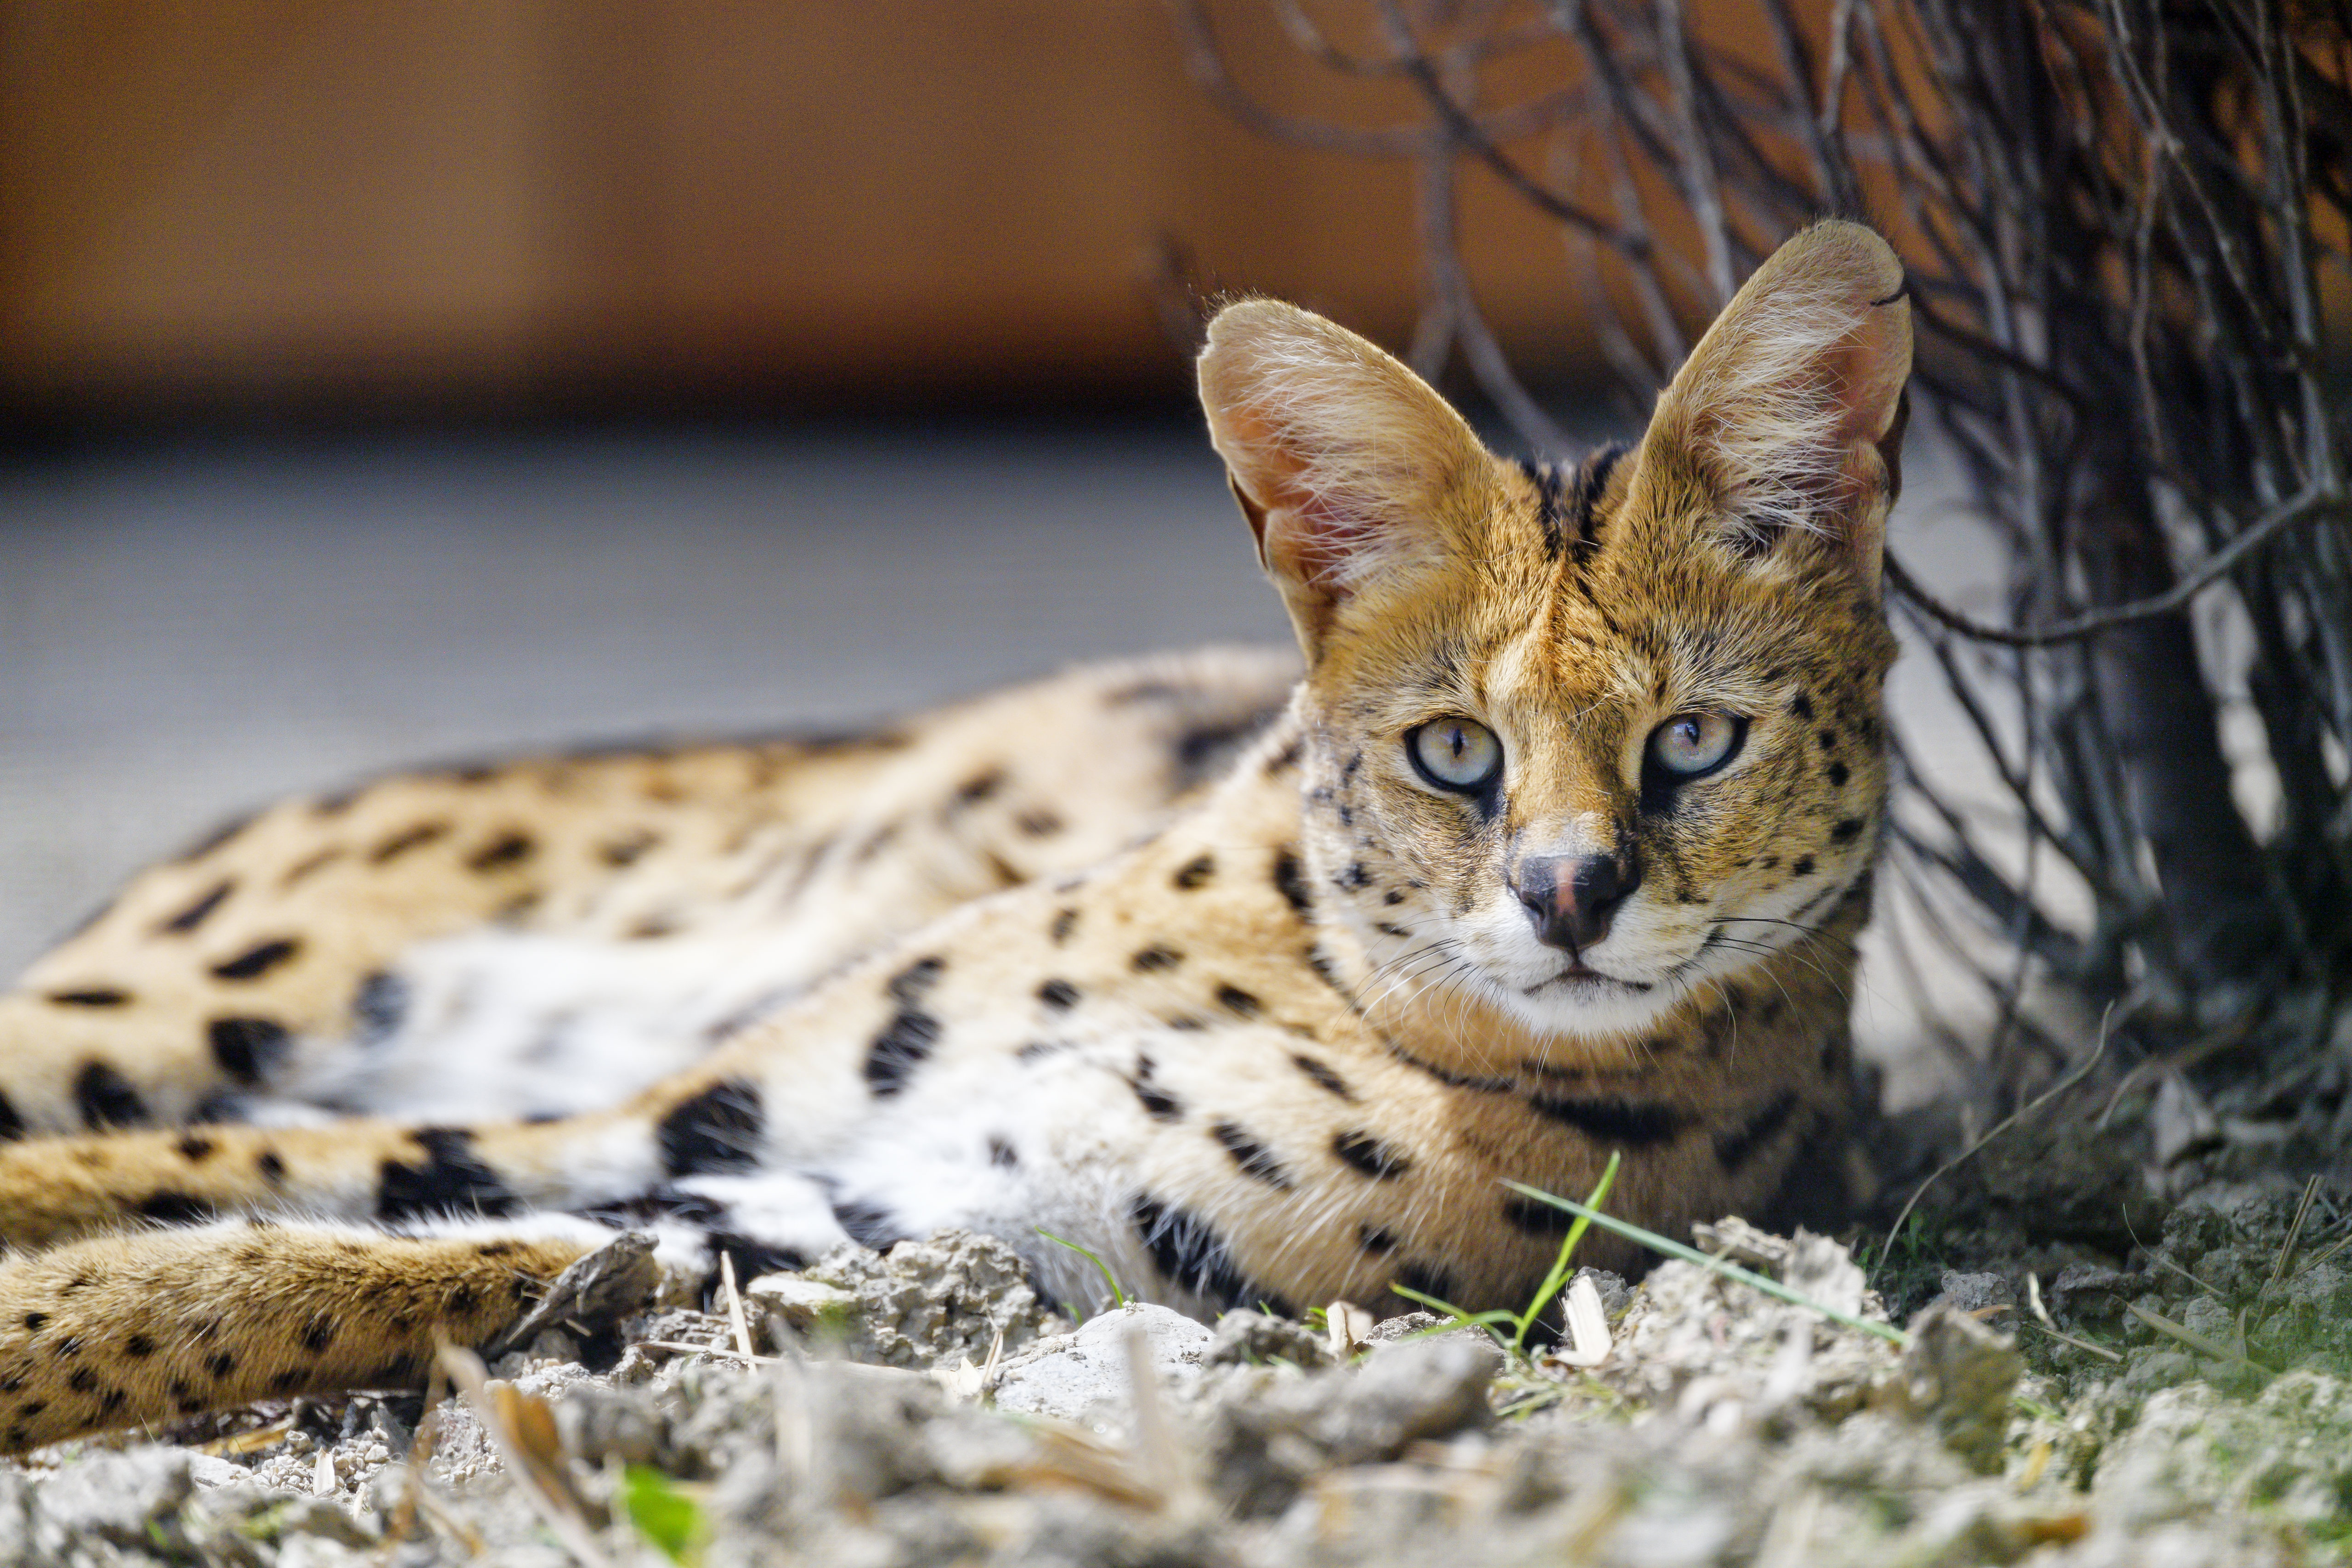 150140 Screensavers and Wallpapers Wild Cat for phone. Download animals, predator, stains, spots, sight, opinion, wild cat, wildcat, serval pictures for free